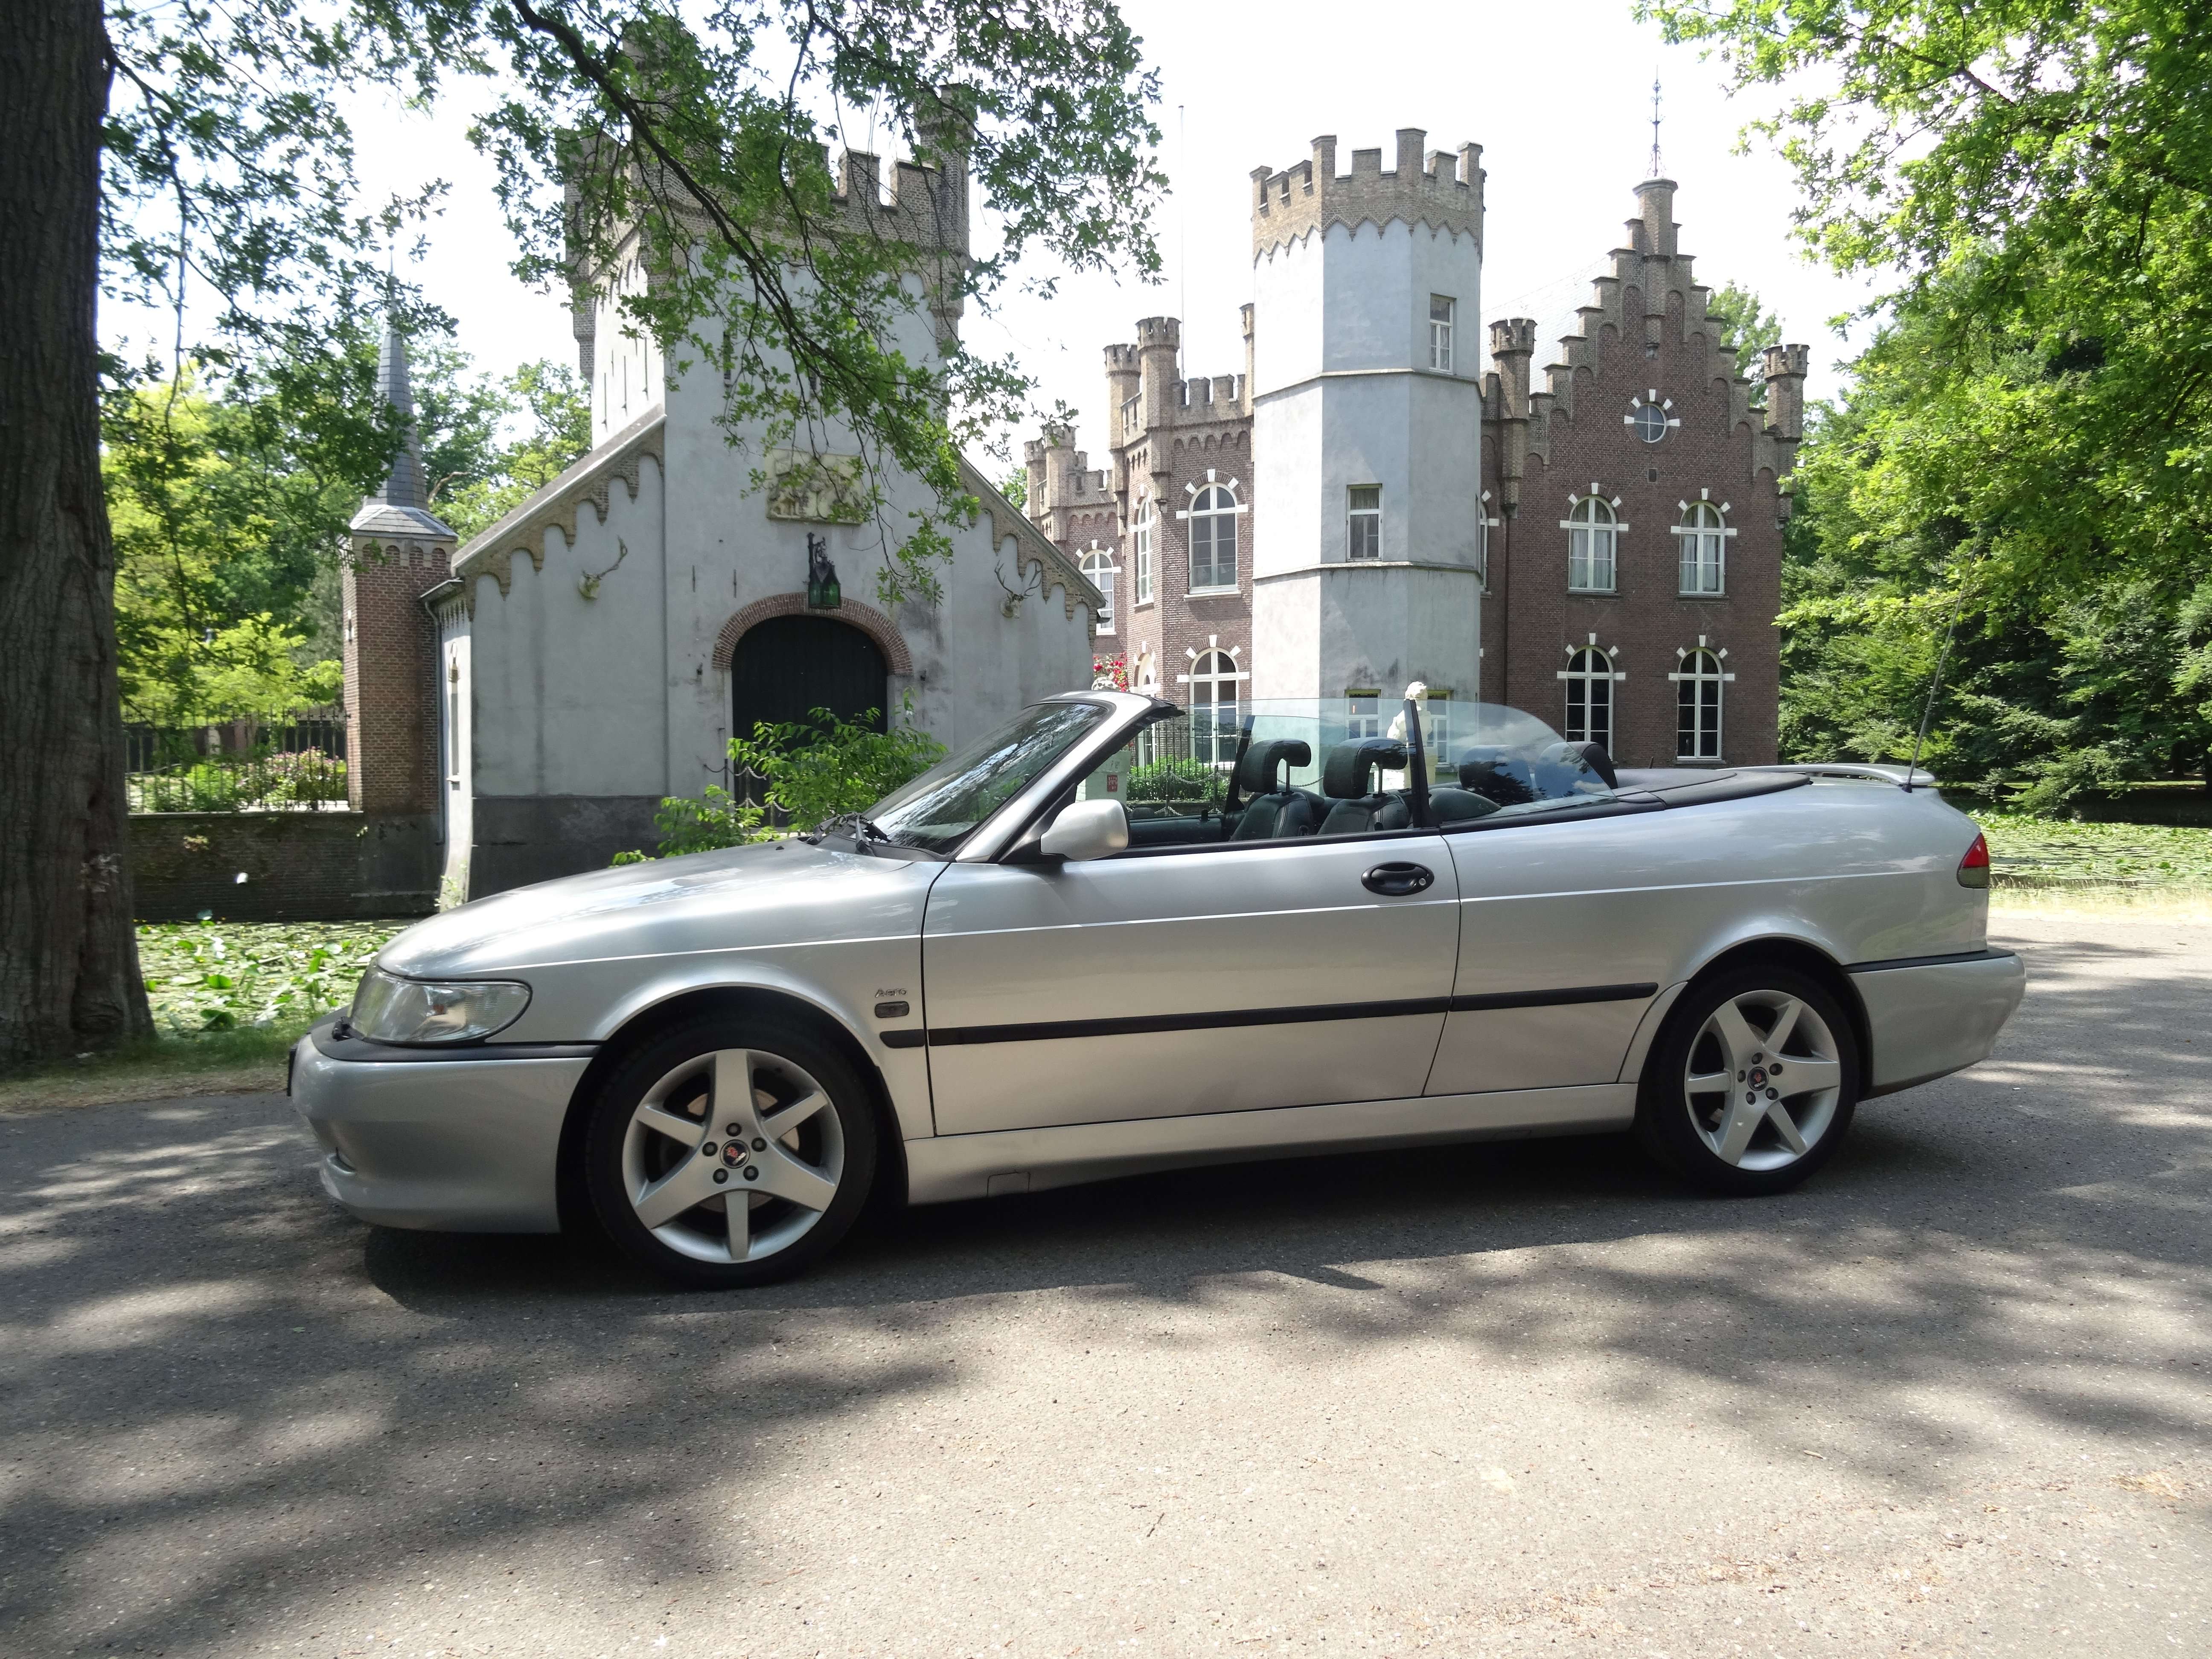 Saab 9-3 Convertible in Grey used in BOXTEL for € 9,250.-